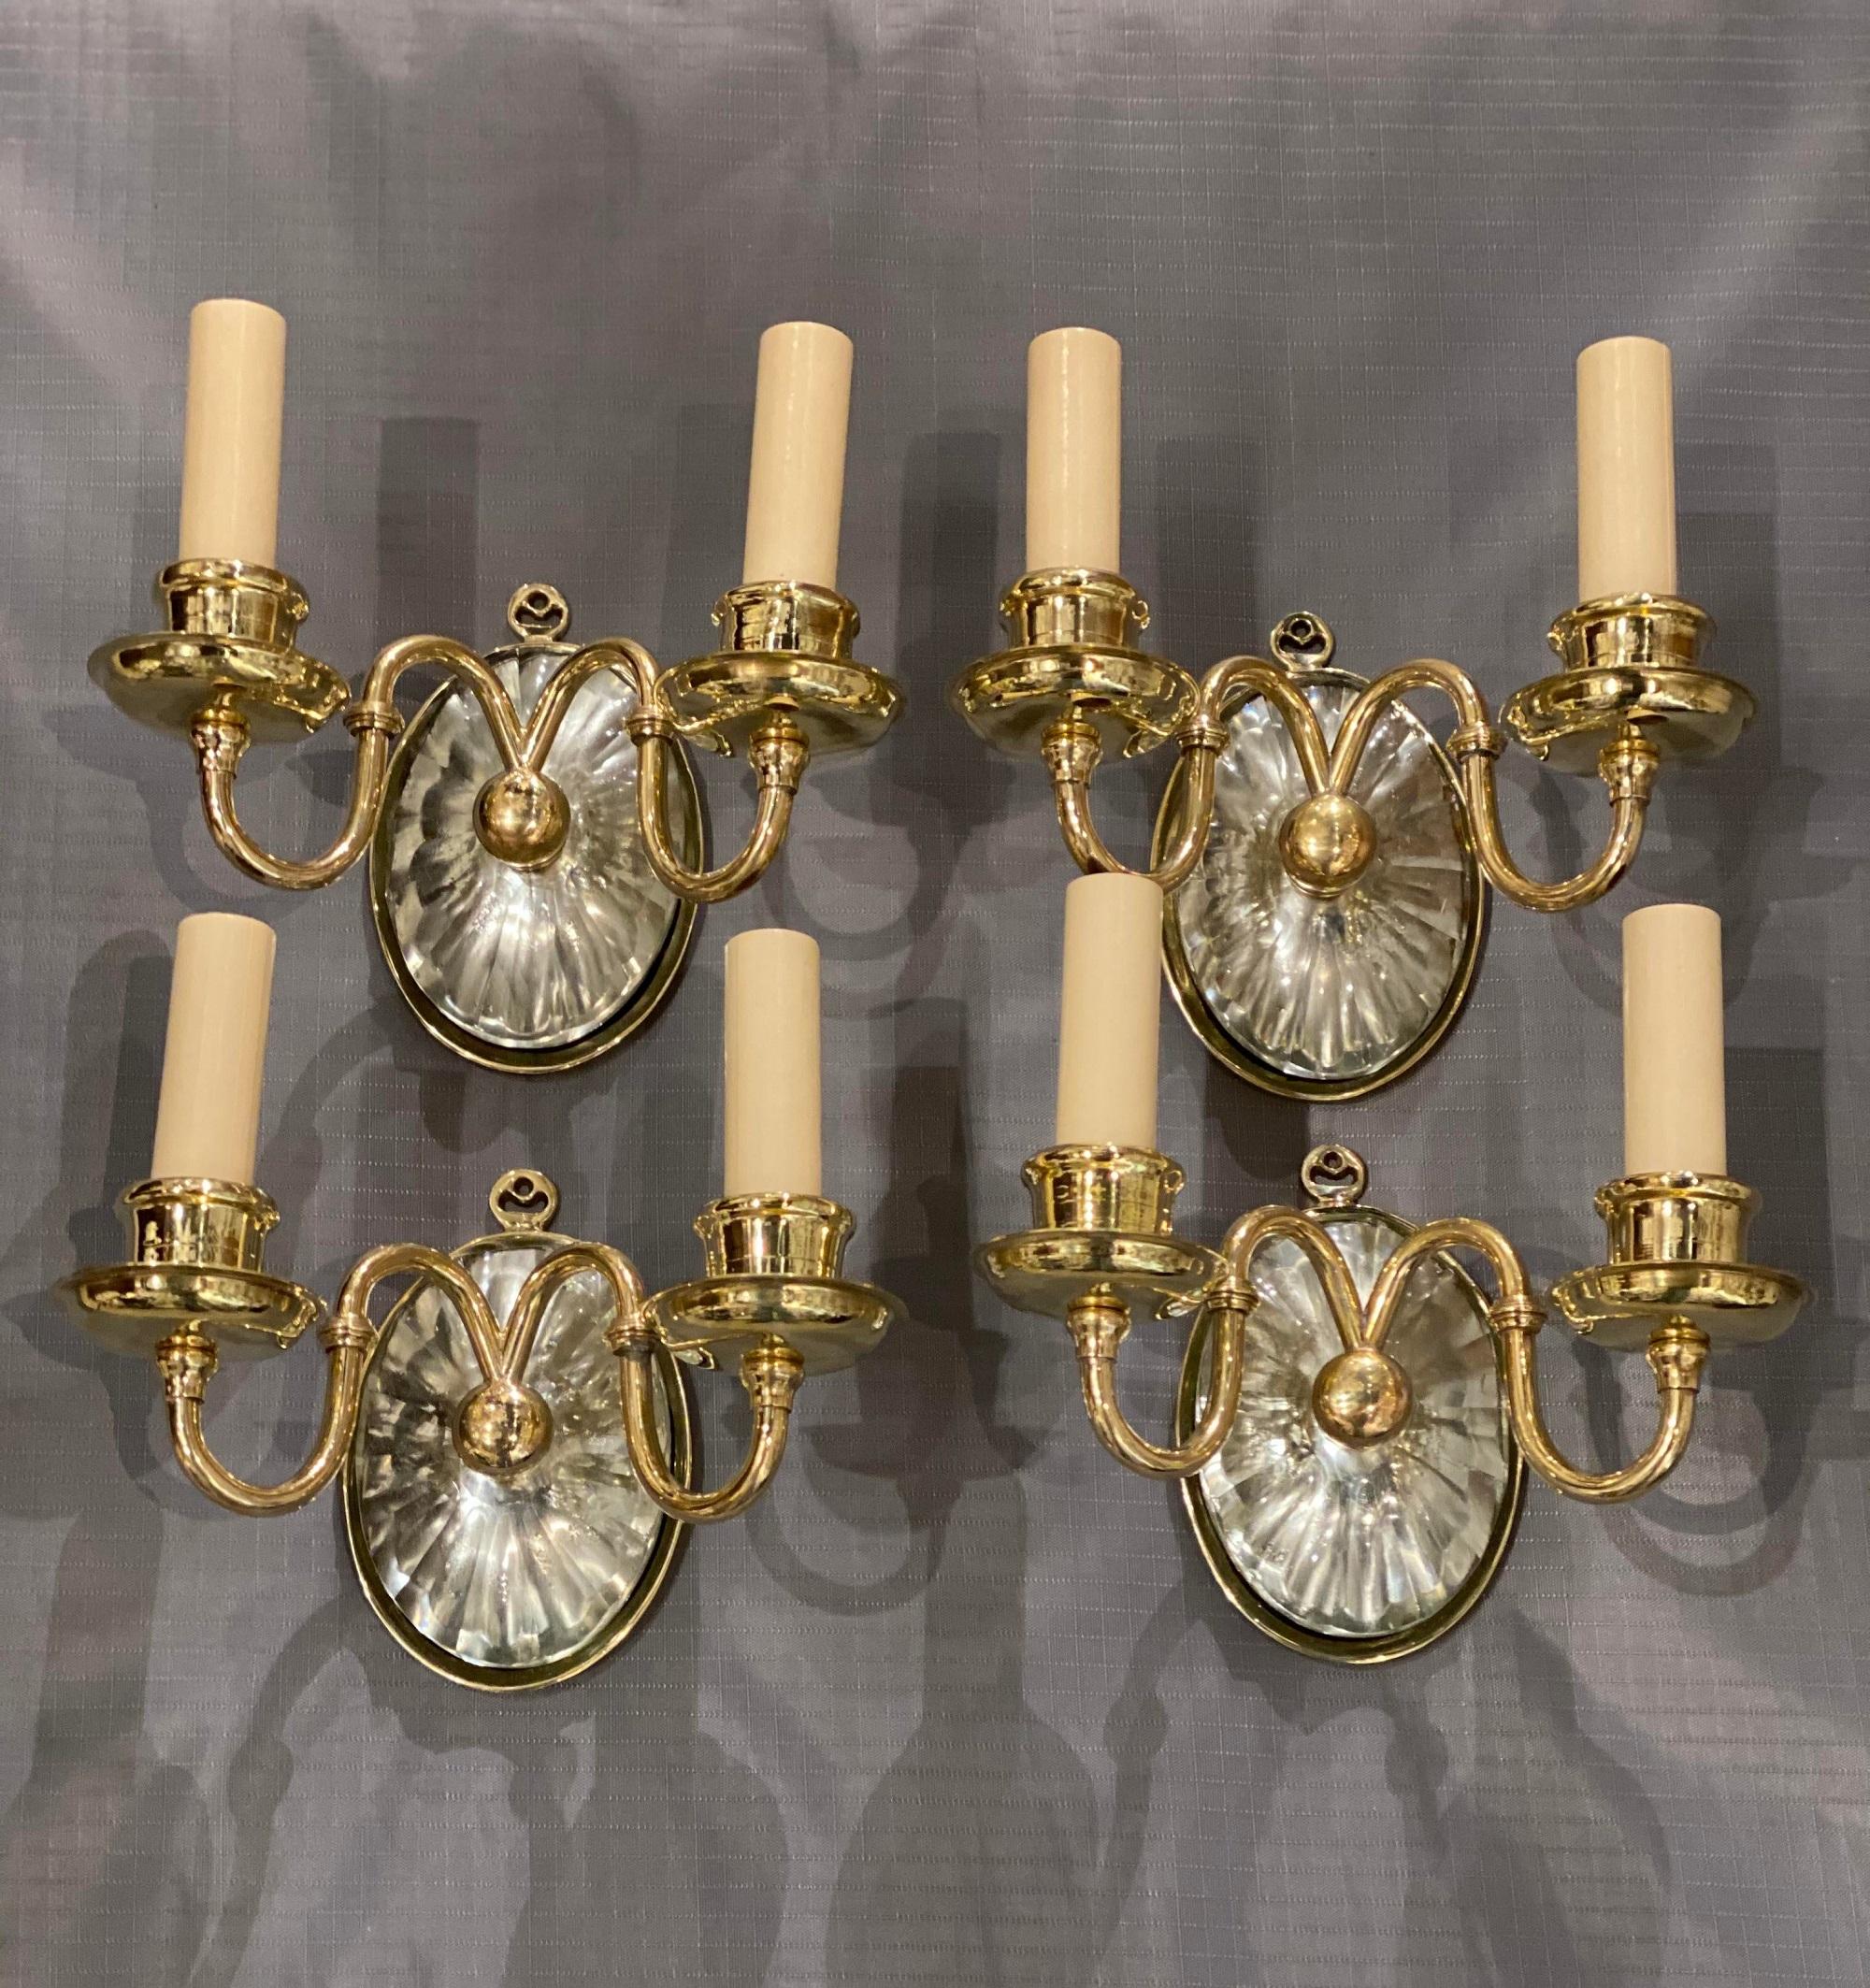 A pair of circa 1920’s gilt bronze and mirrored backplate Caldwell sconces. Small size.